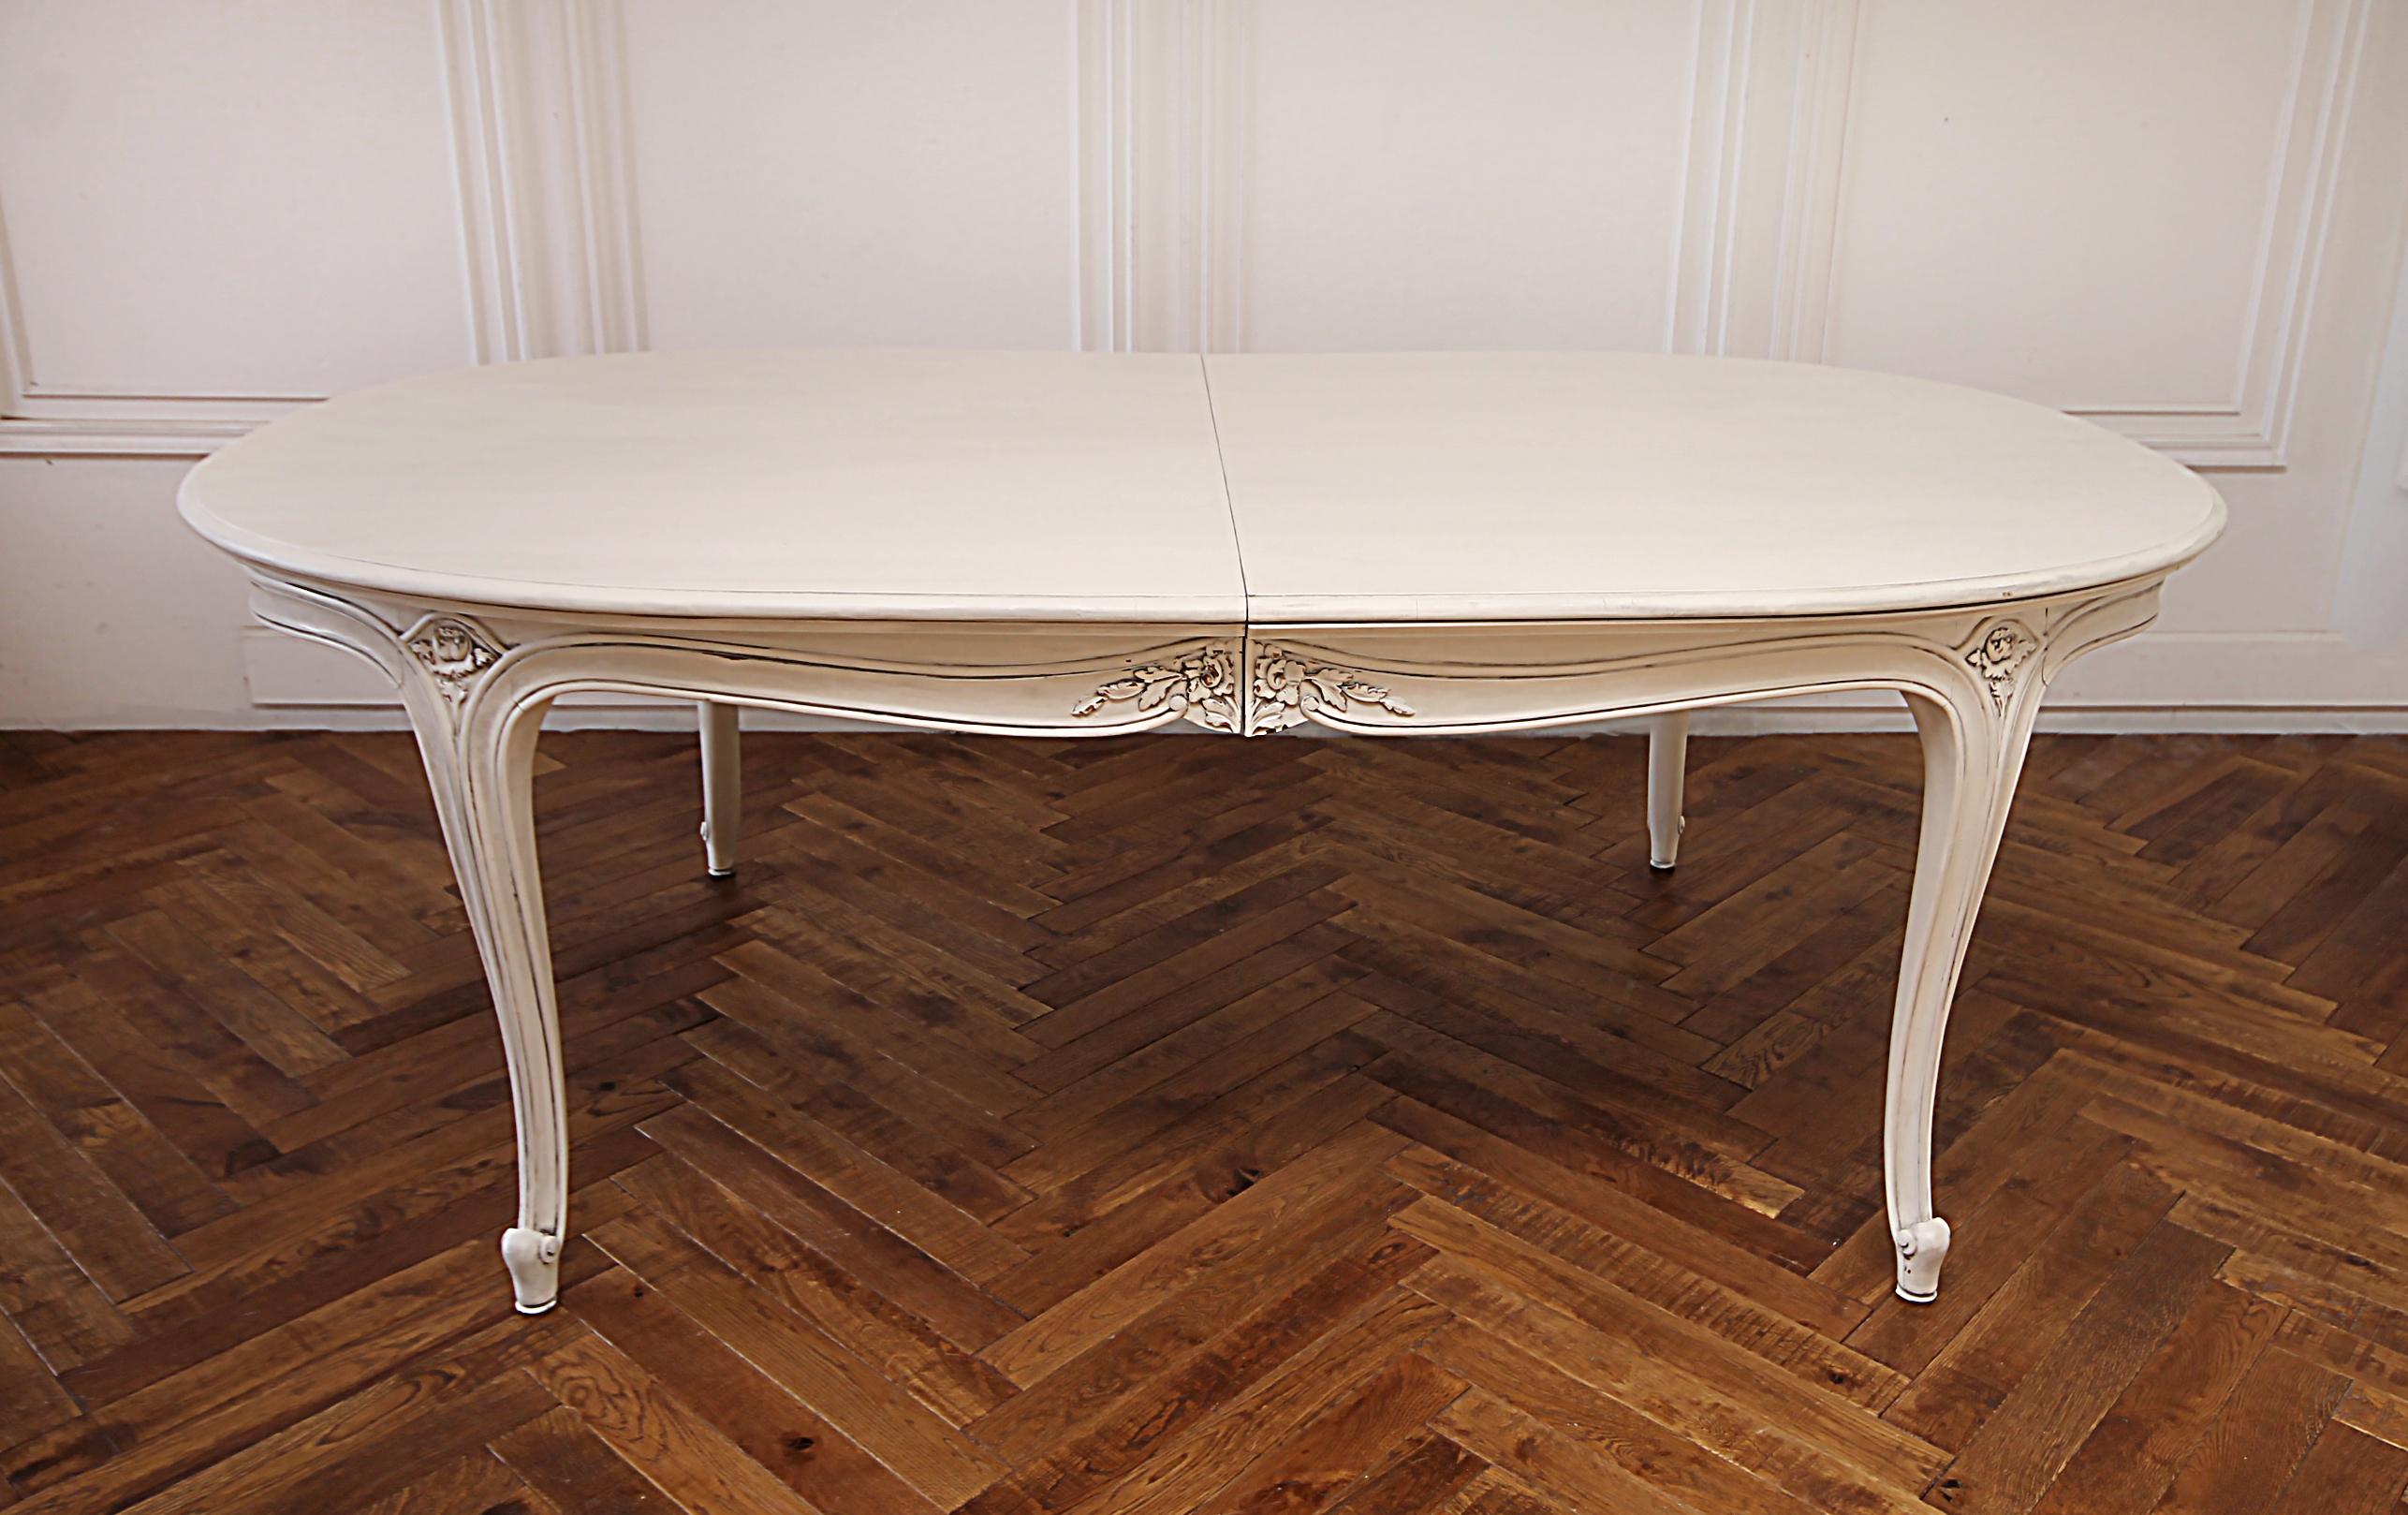 20th century Louis XV Style painted dining table with leaves
Painted in our oyster white finish with subtle distressed edges and finished with an antique patina. The dining table has 2 leaves with finished aprons so the decorative sides are